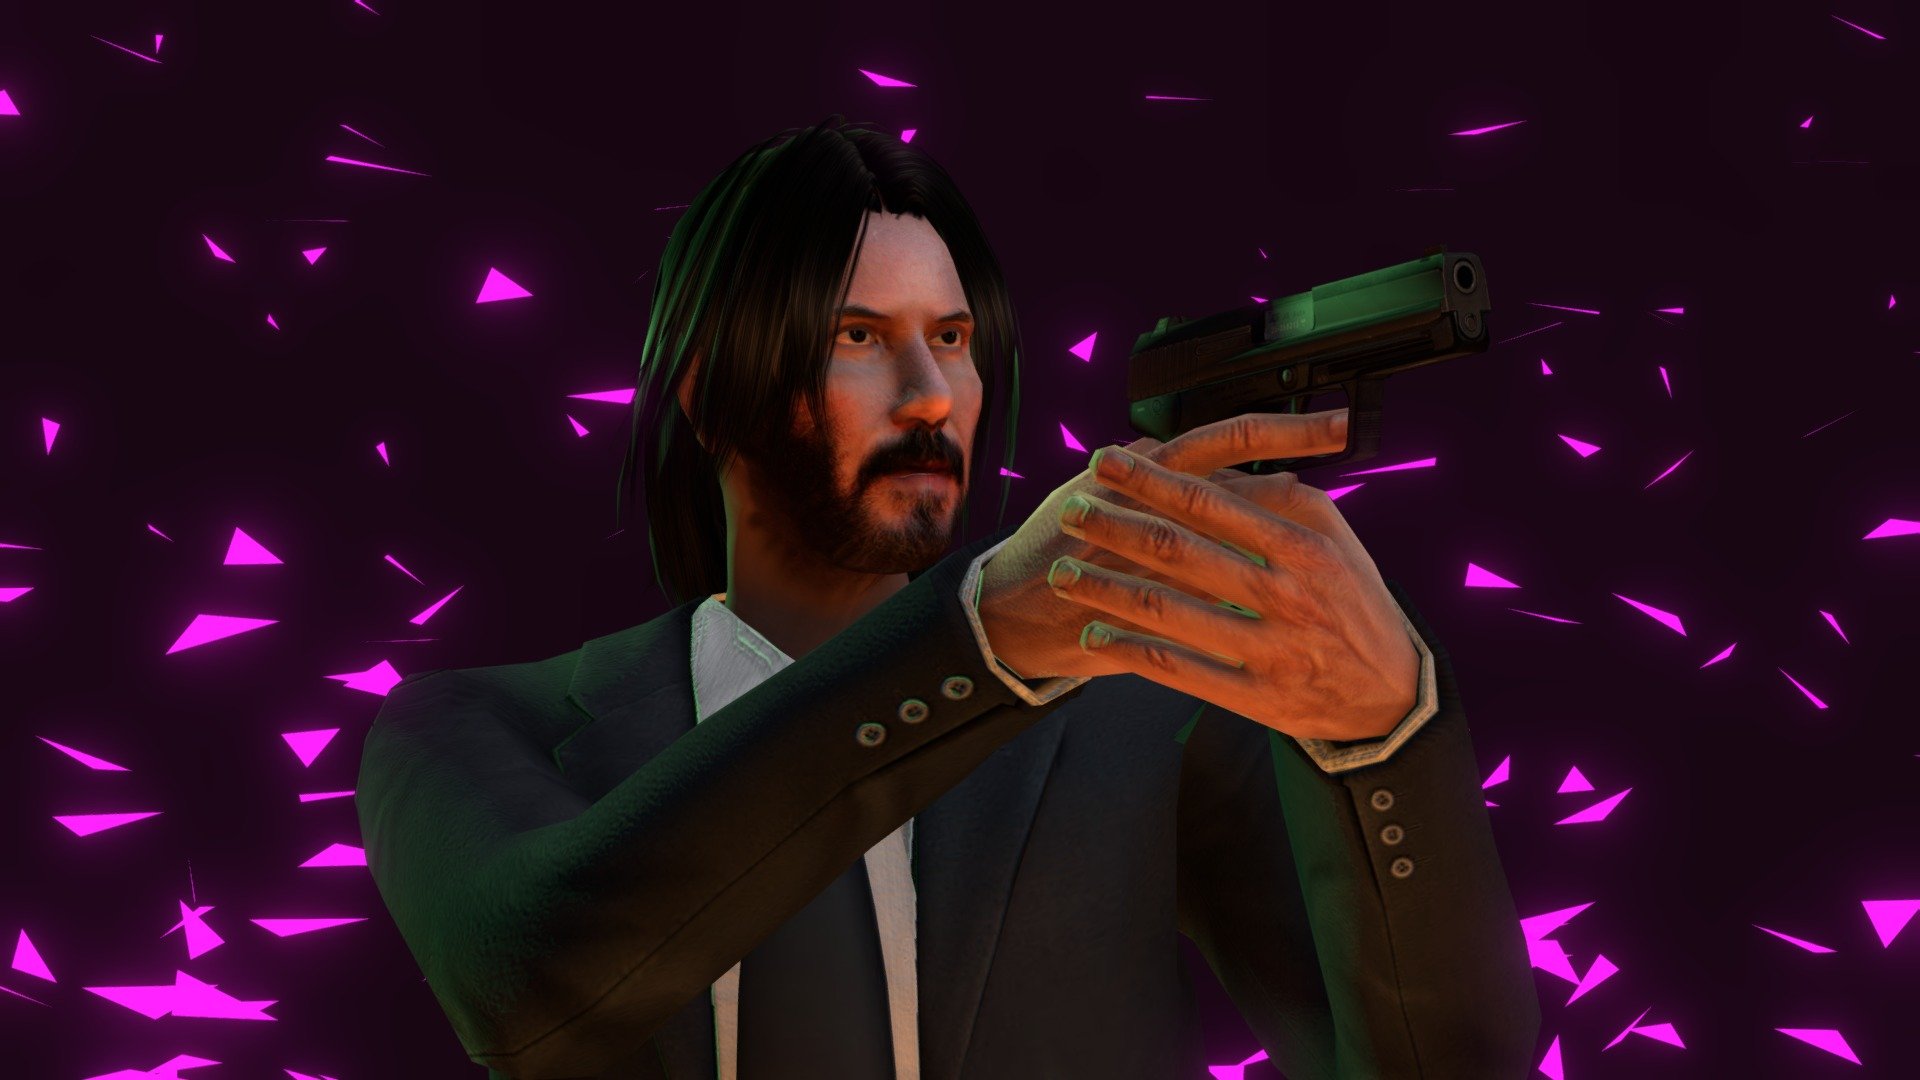 Keanu Reeves action character - Wick - 3D model by maxi.ariani 3d model